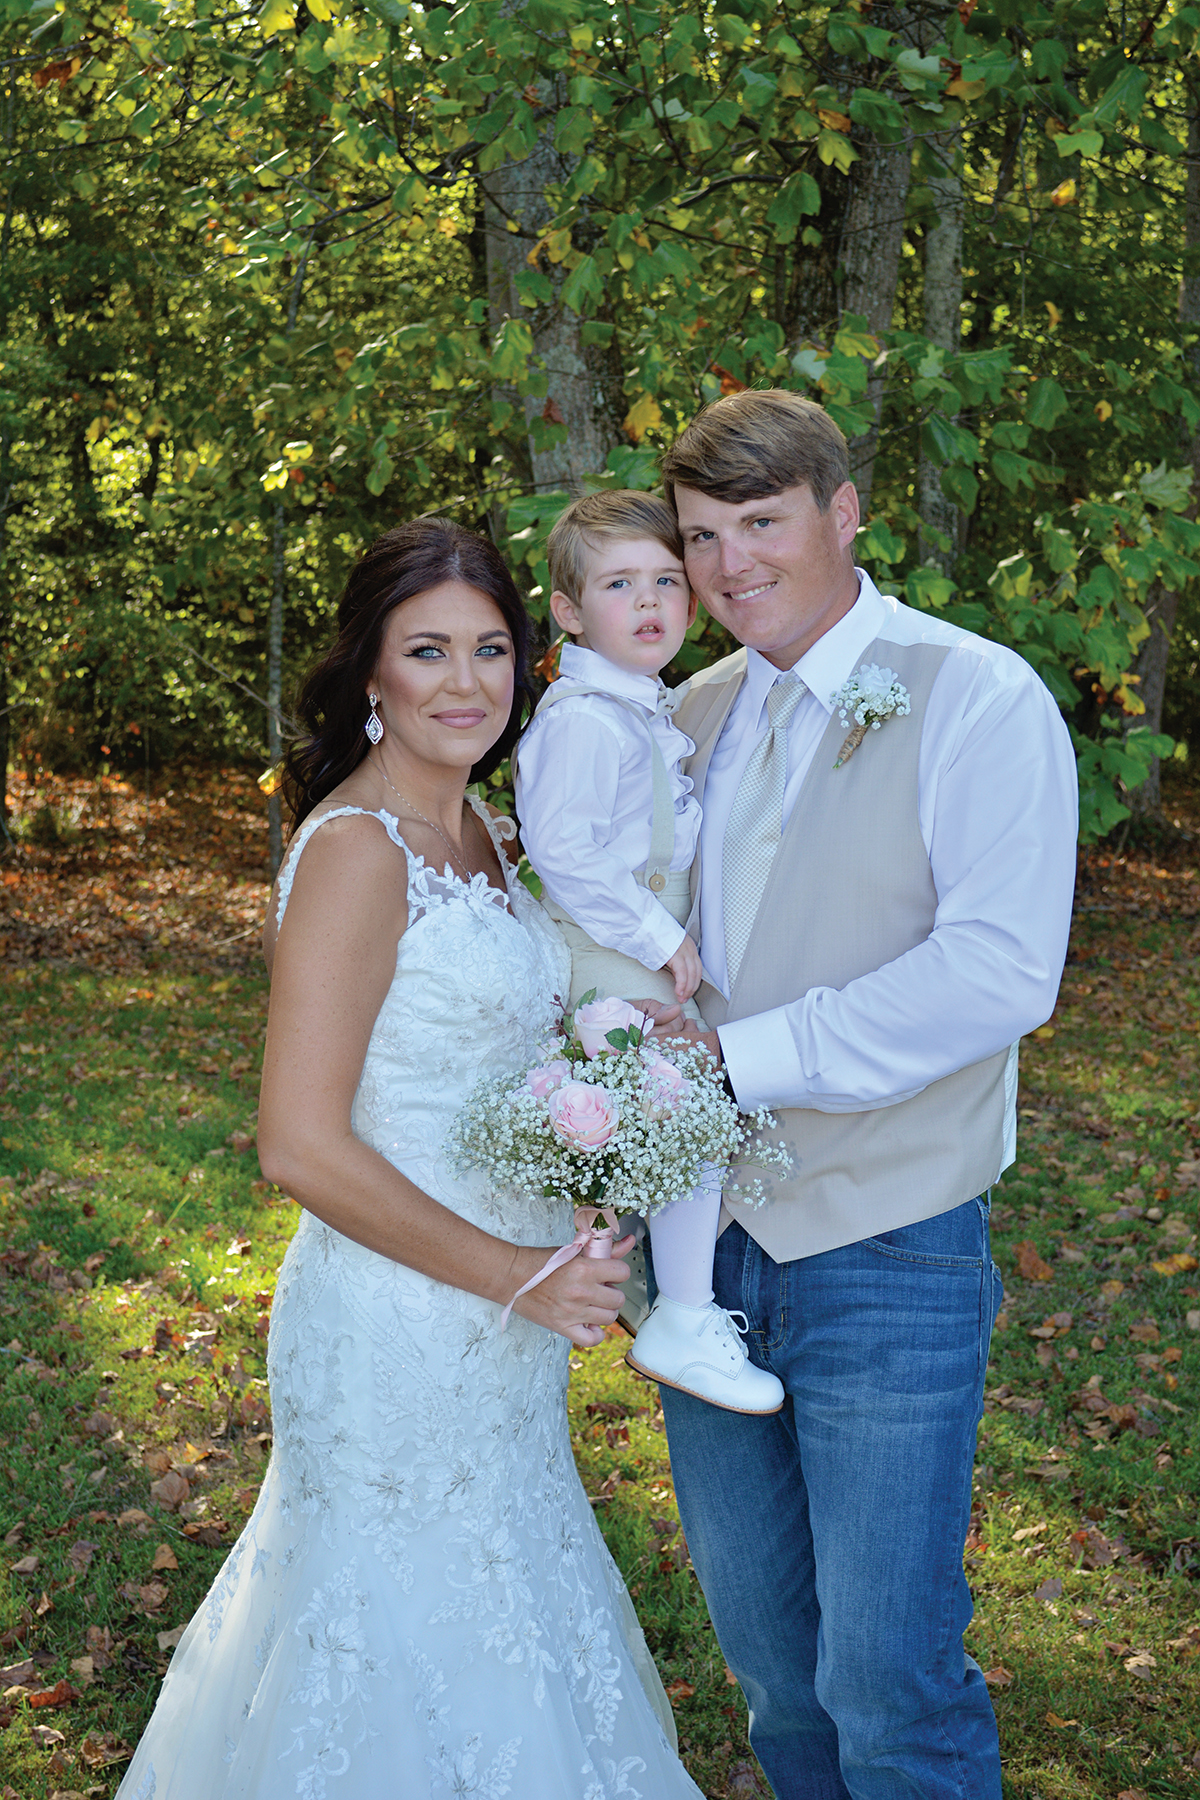 Shannon + Chris Naylor wedding posing with son